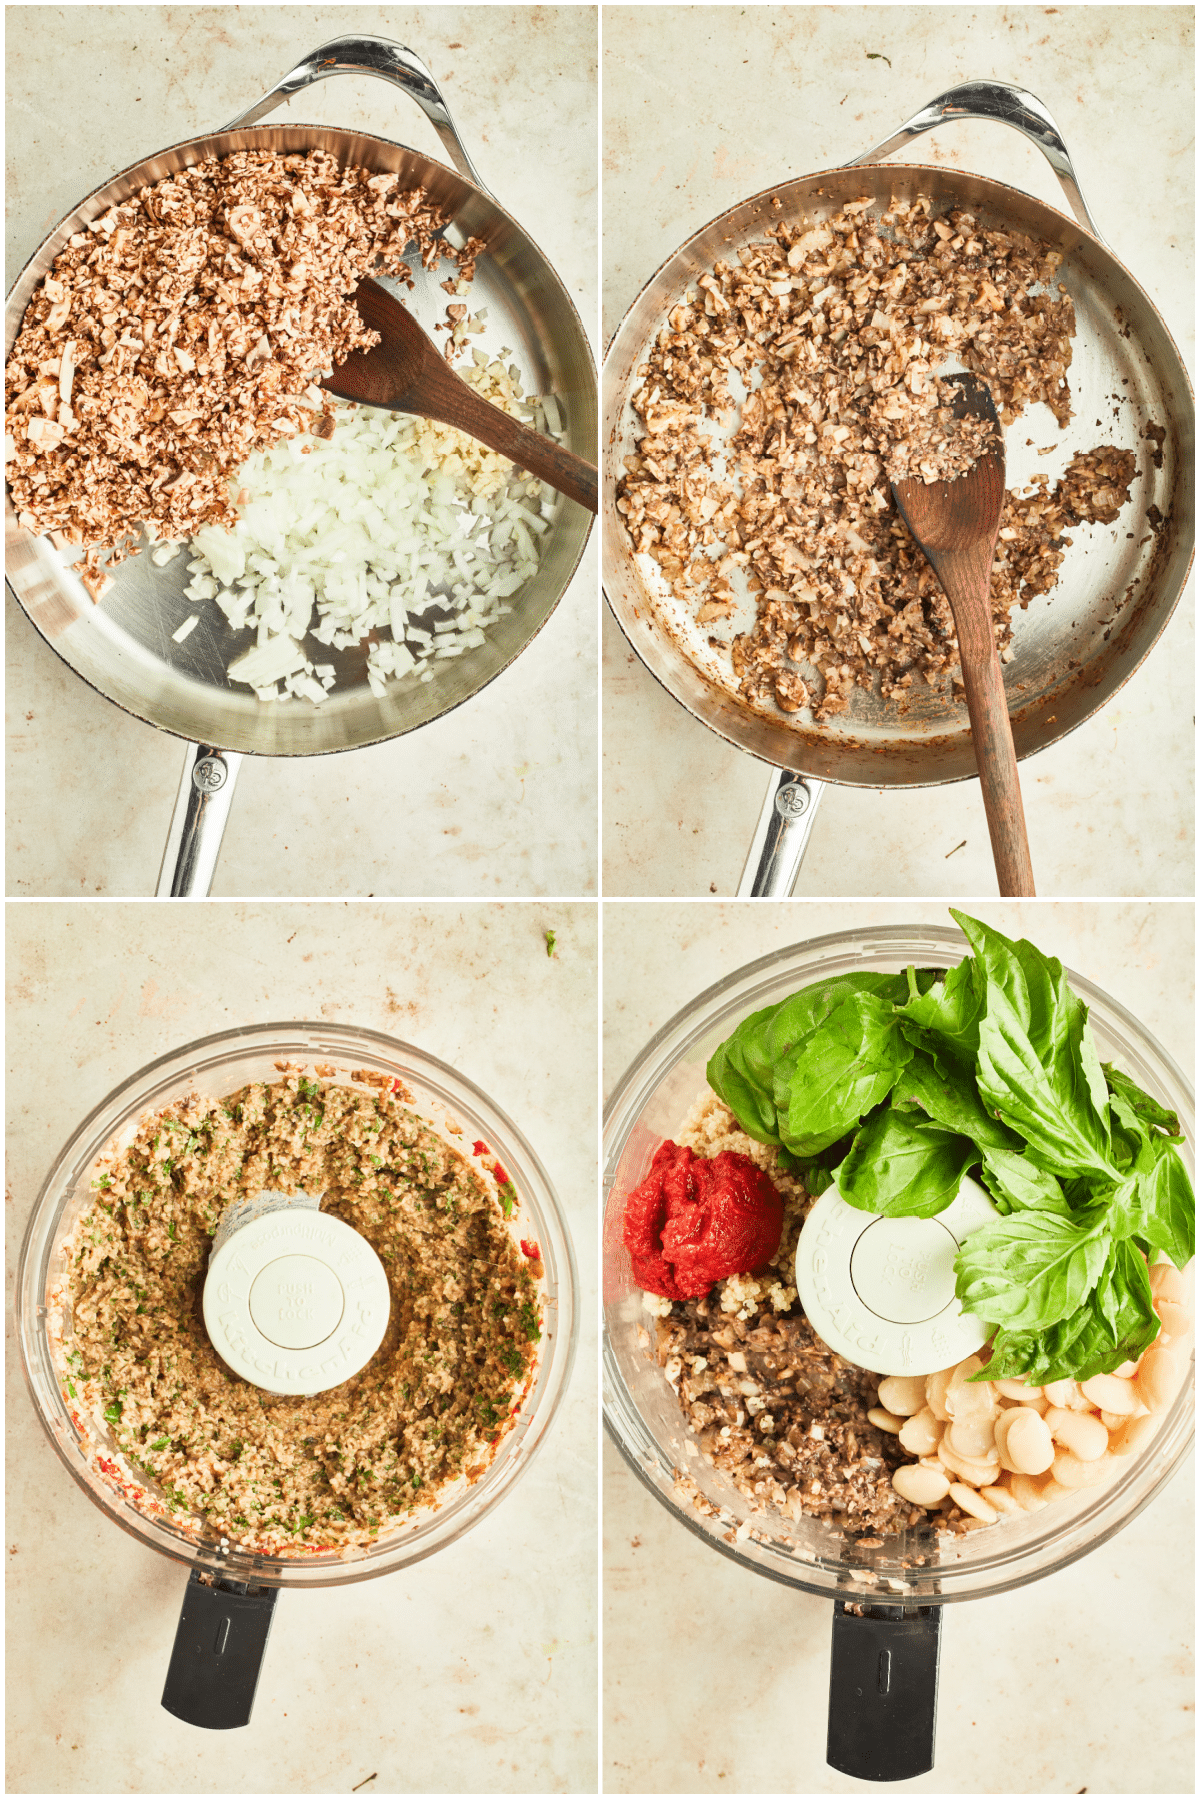 A four image collage showing the first four steps in making basil quinoa meatballs: saute onion and garlic in a skillet, add mushrooms, transfer to a food processor, add fresh basil, beans, and spices.